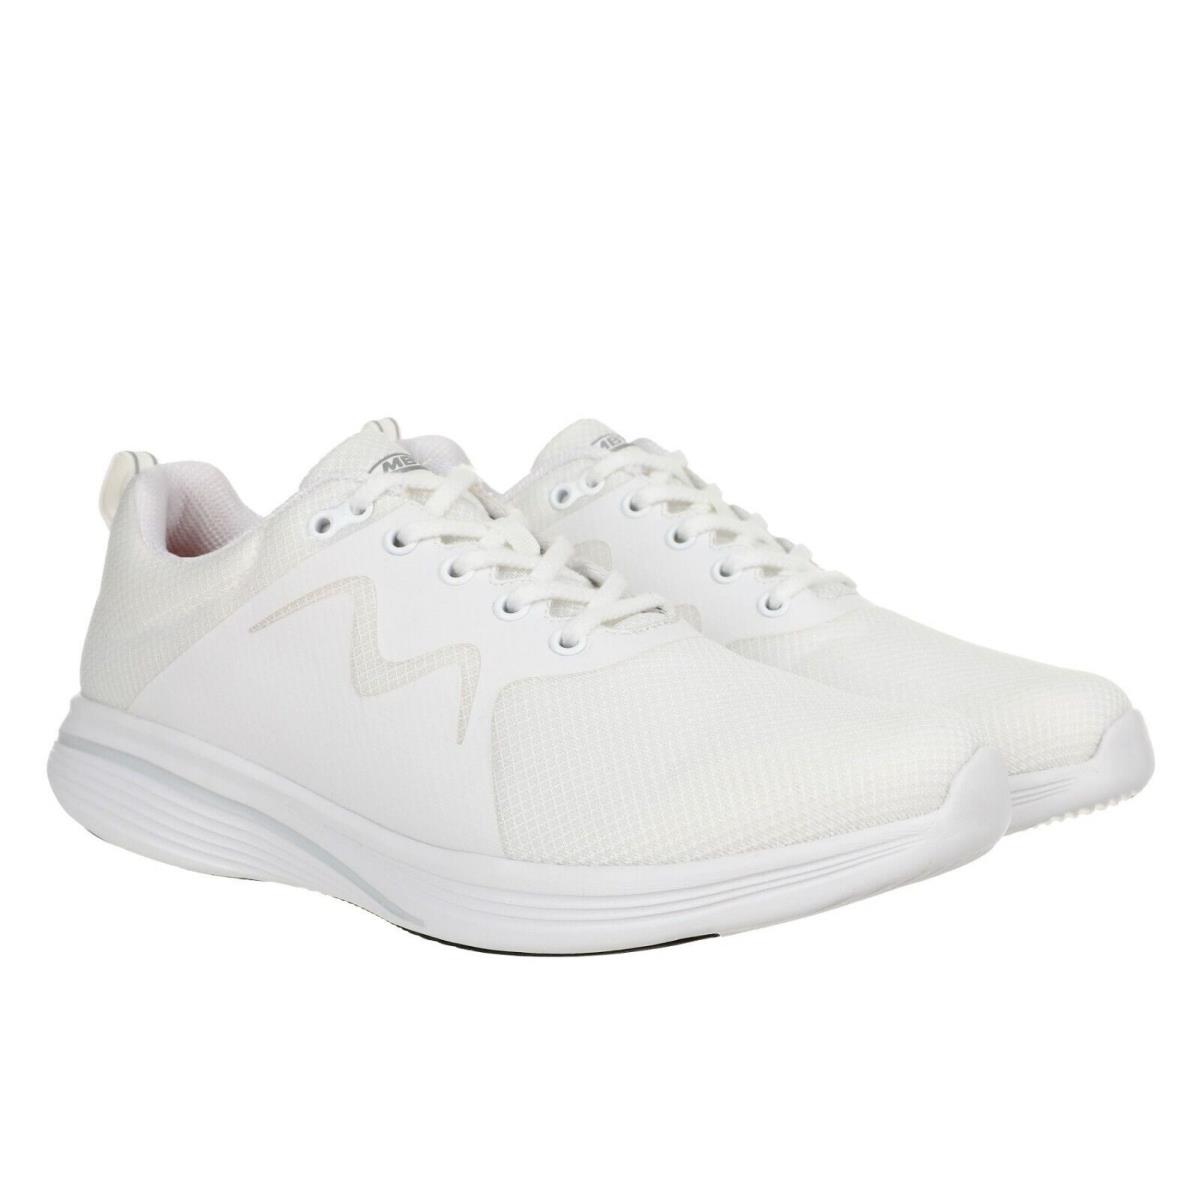 MBT shoes ACTIVE EVERYDAY WALKER - Yasu-White 0